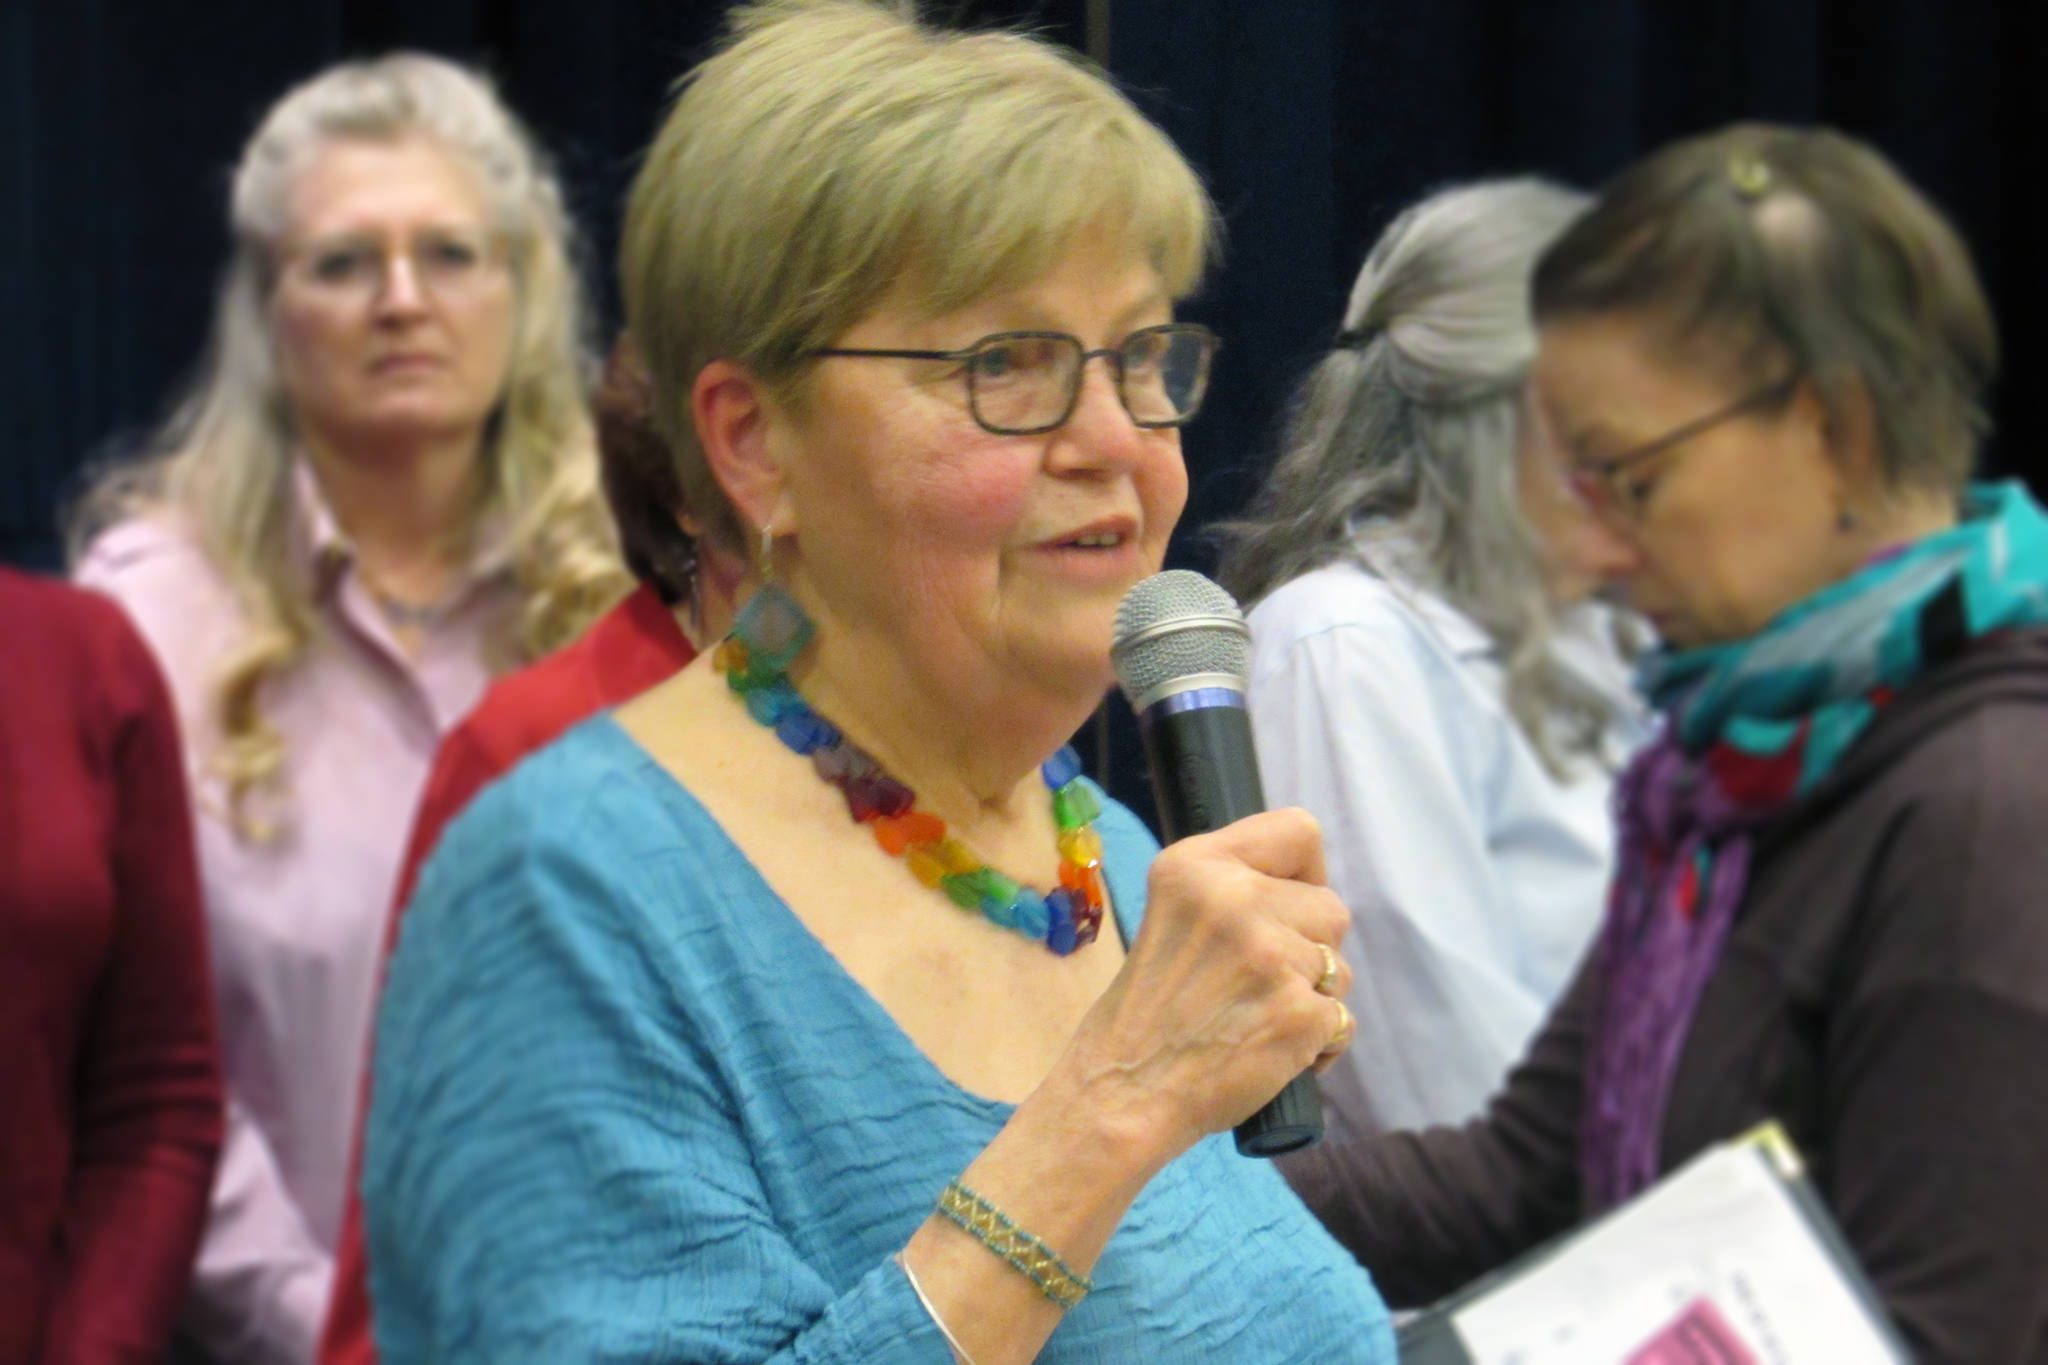 Maureen Longworth, co-coordinator of the Stonewall 50 Project, speaks at the Stonewall 50 Tea & Dance Event Saturday, Feb. 9, 2019. (Ben Hohenstatt | Capital City Weekly)